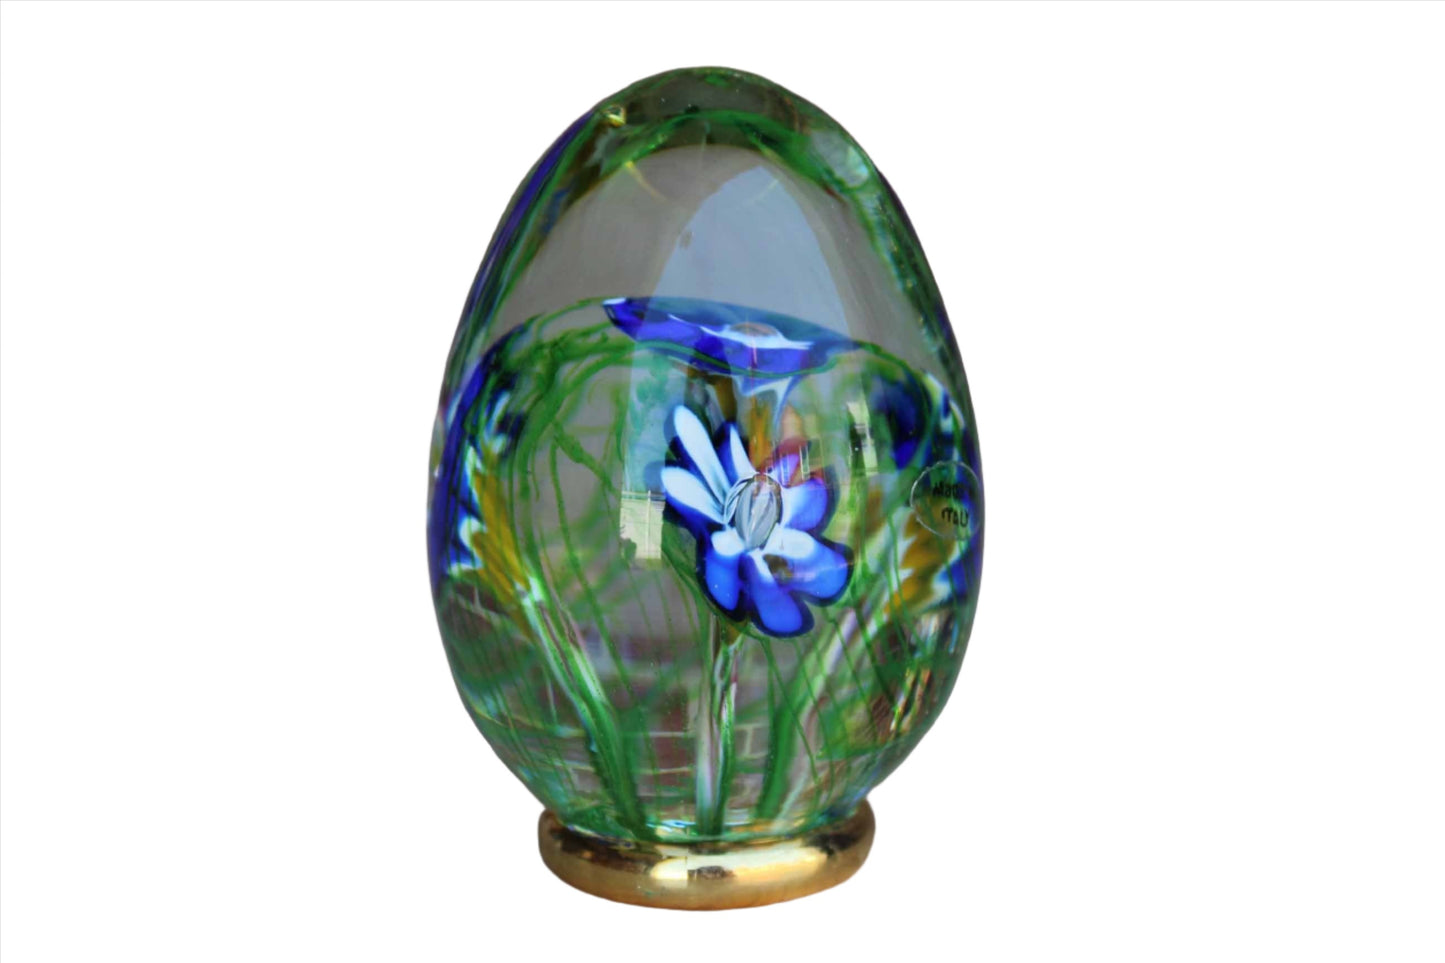 Blown-Glass Egg with Blue Flowers, Made in Italy